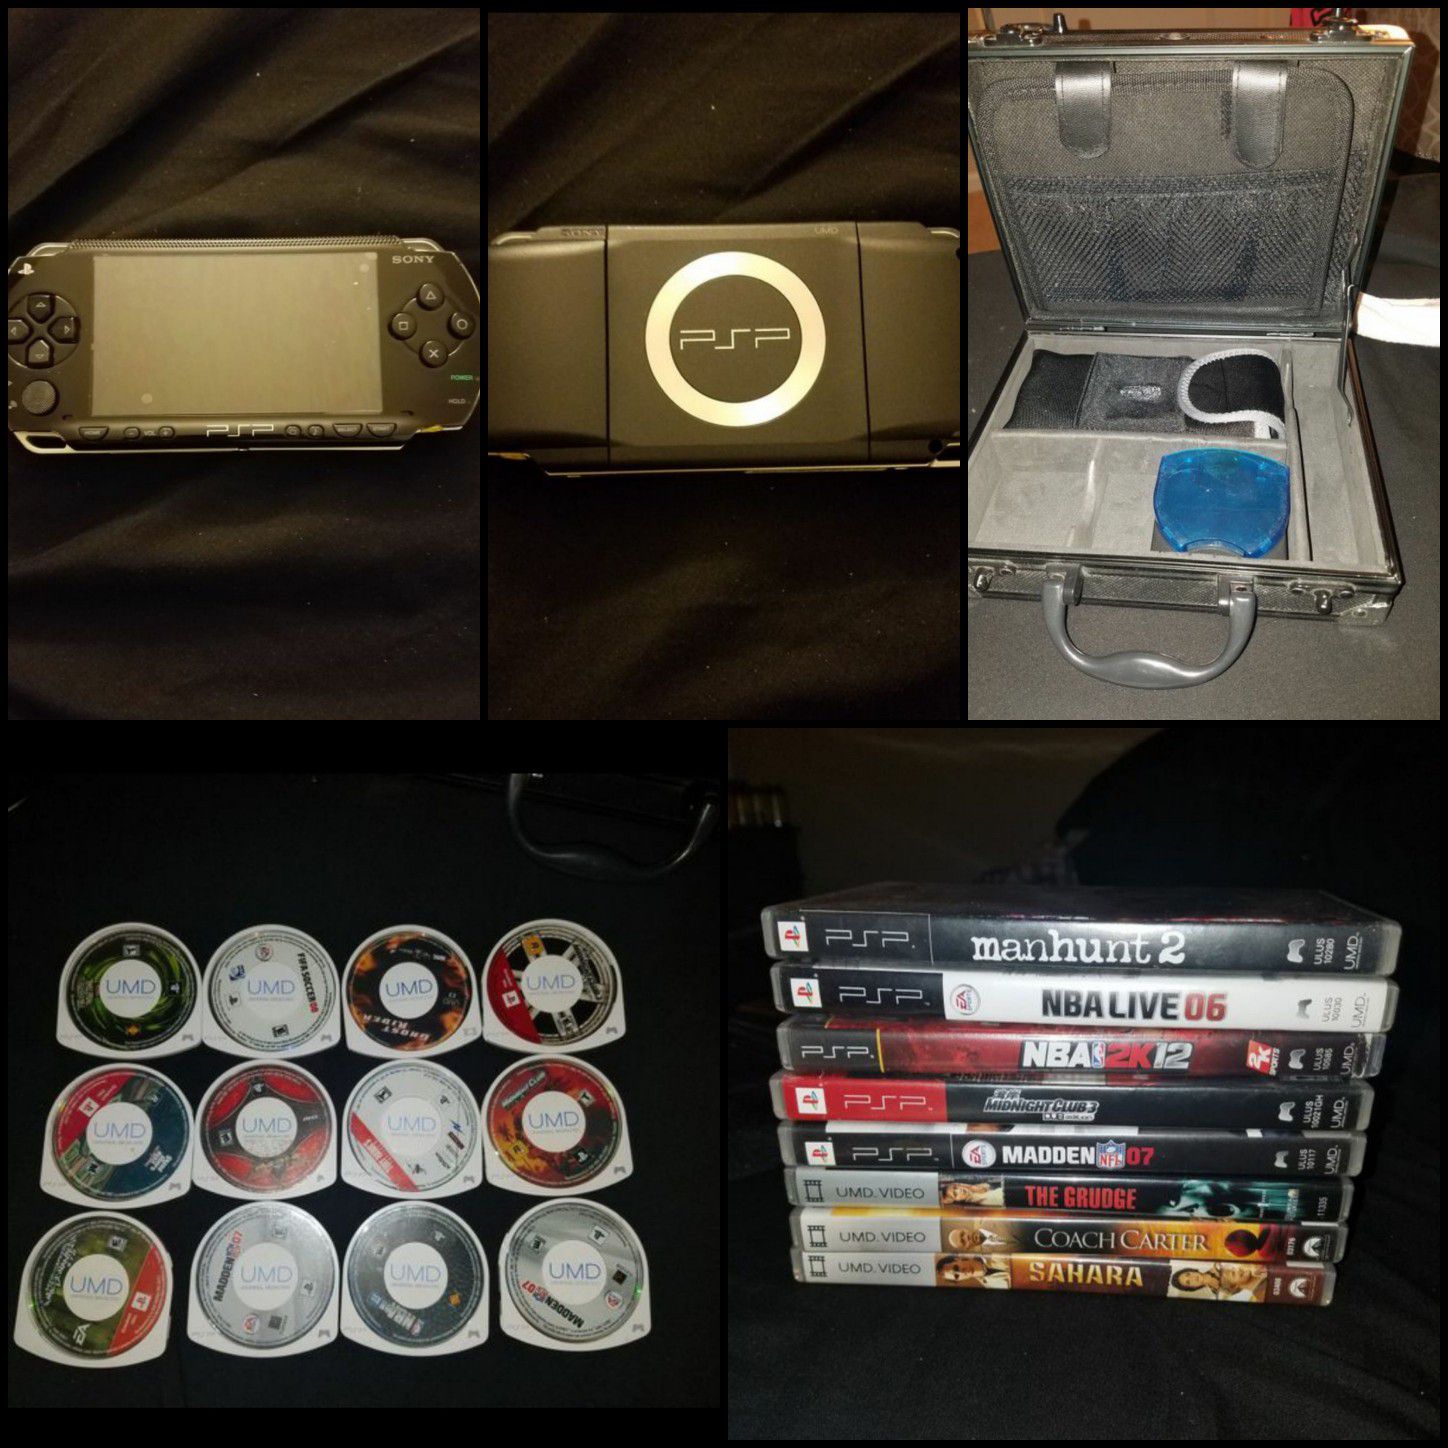 New PSP with extras